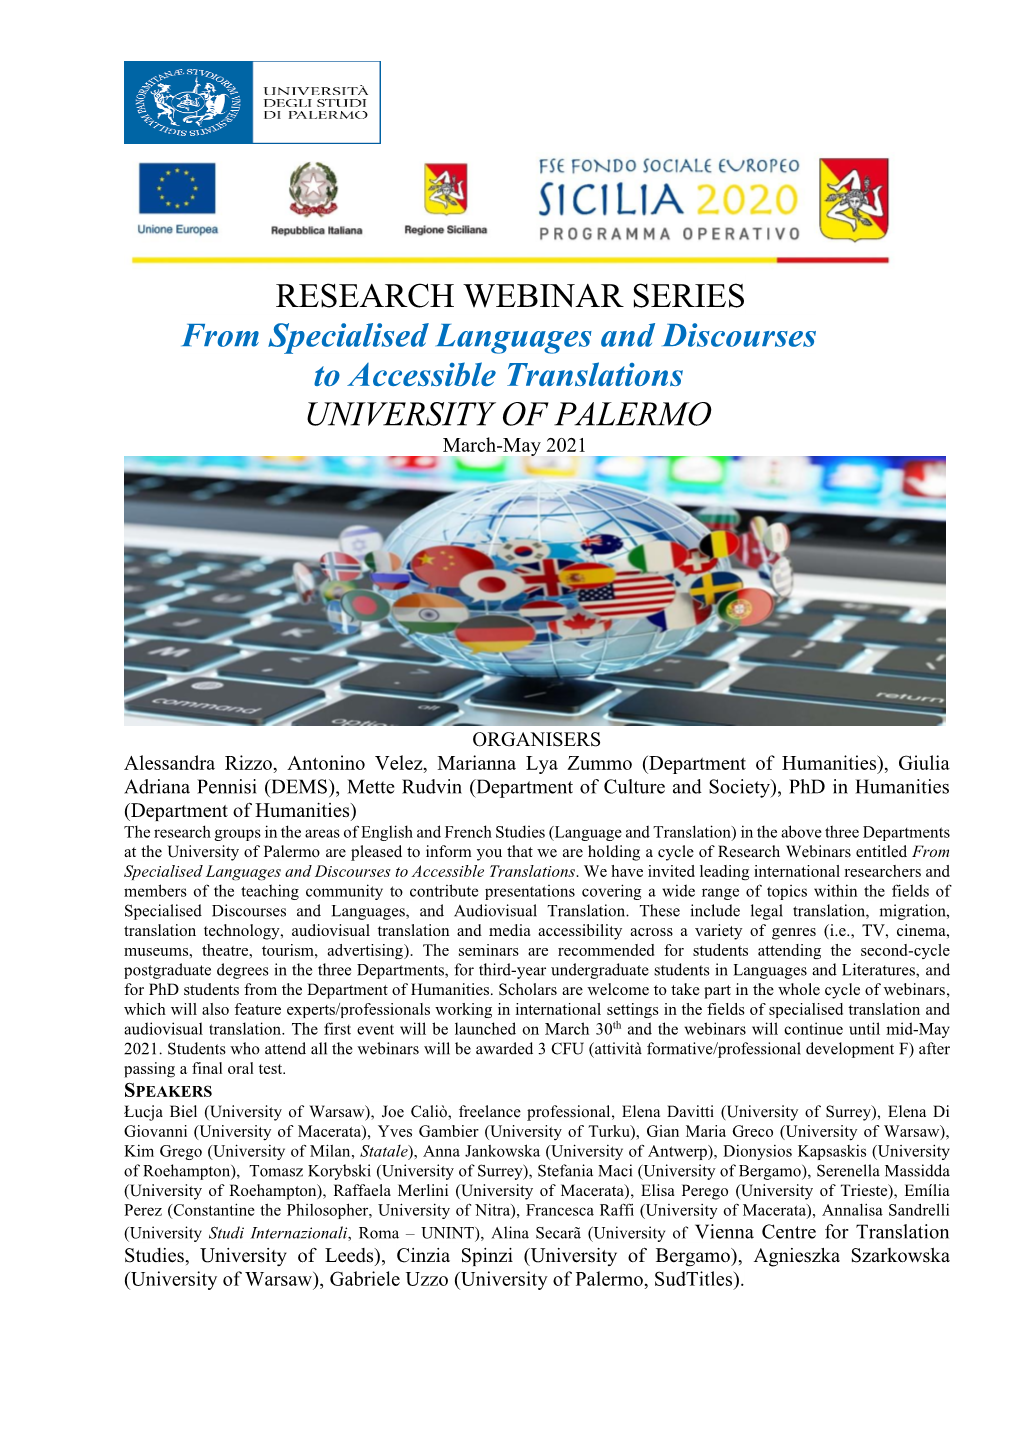 RESEARCH WEBINAR SERIES from Specialised Languages and Discourses to Accessible Translations UNIVERSITY of PALERMO March-May 2021